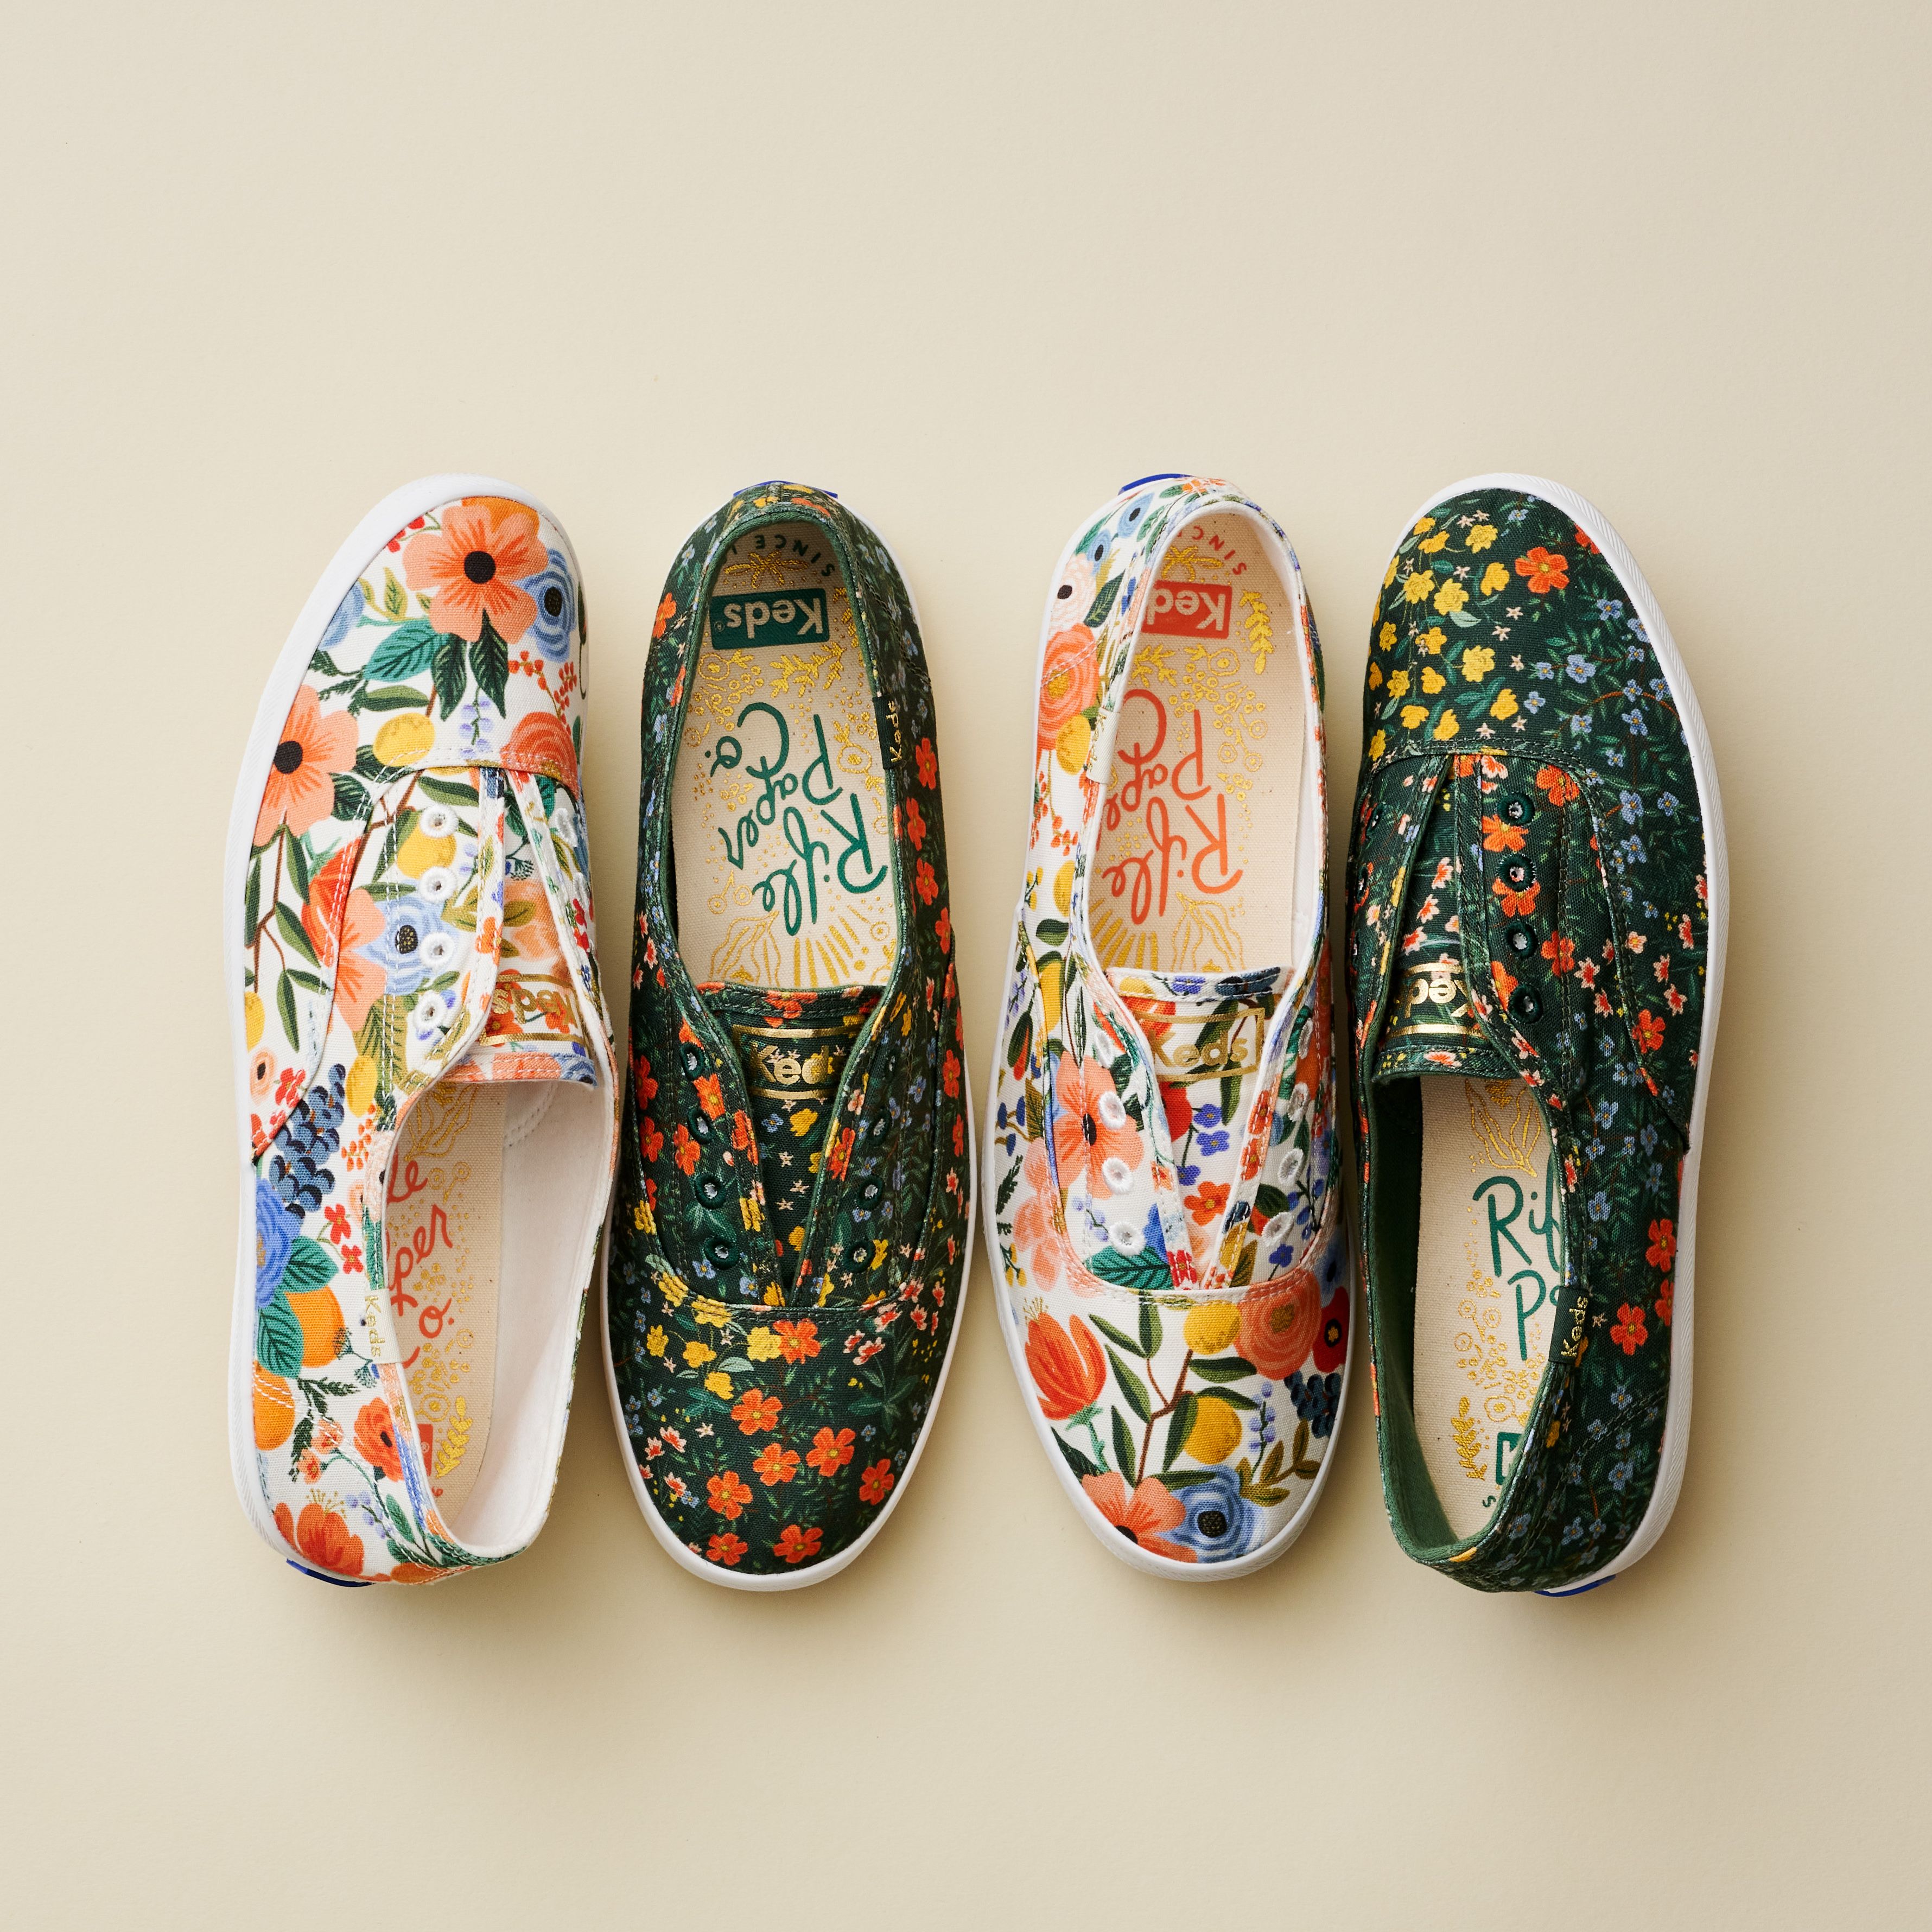 ICYMI, Rifle Paper Co. and Keds Dropped a Dreamy, Garden-Inspired Collab